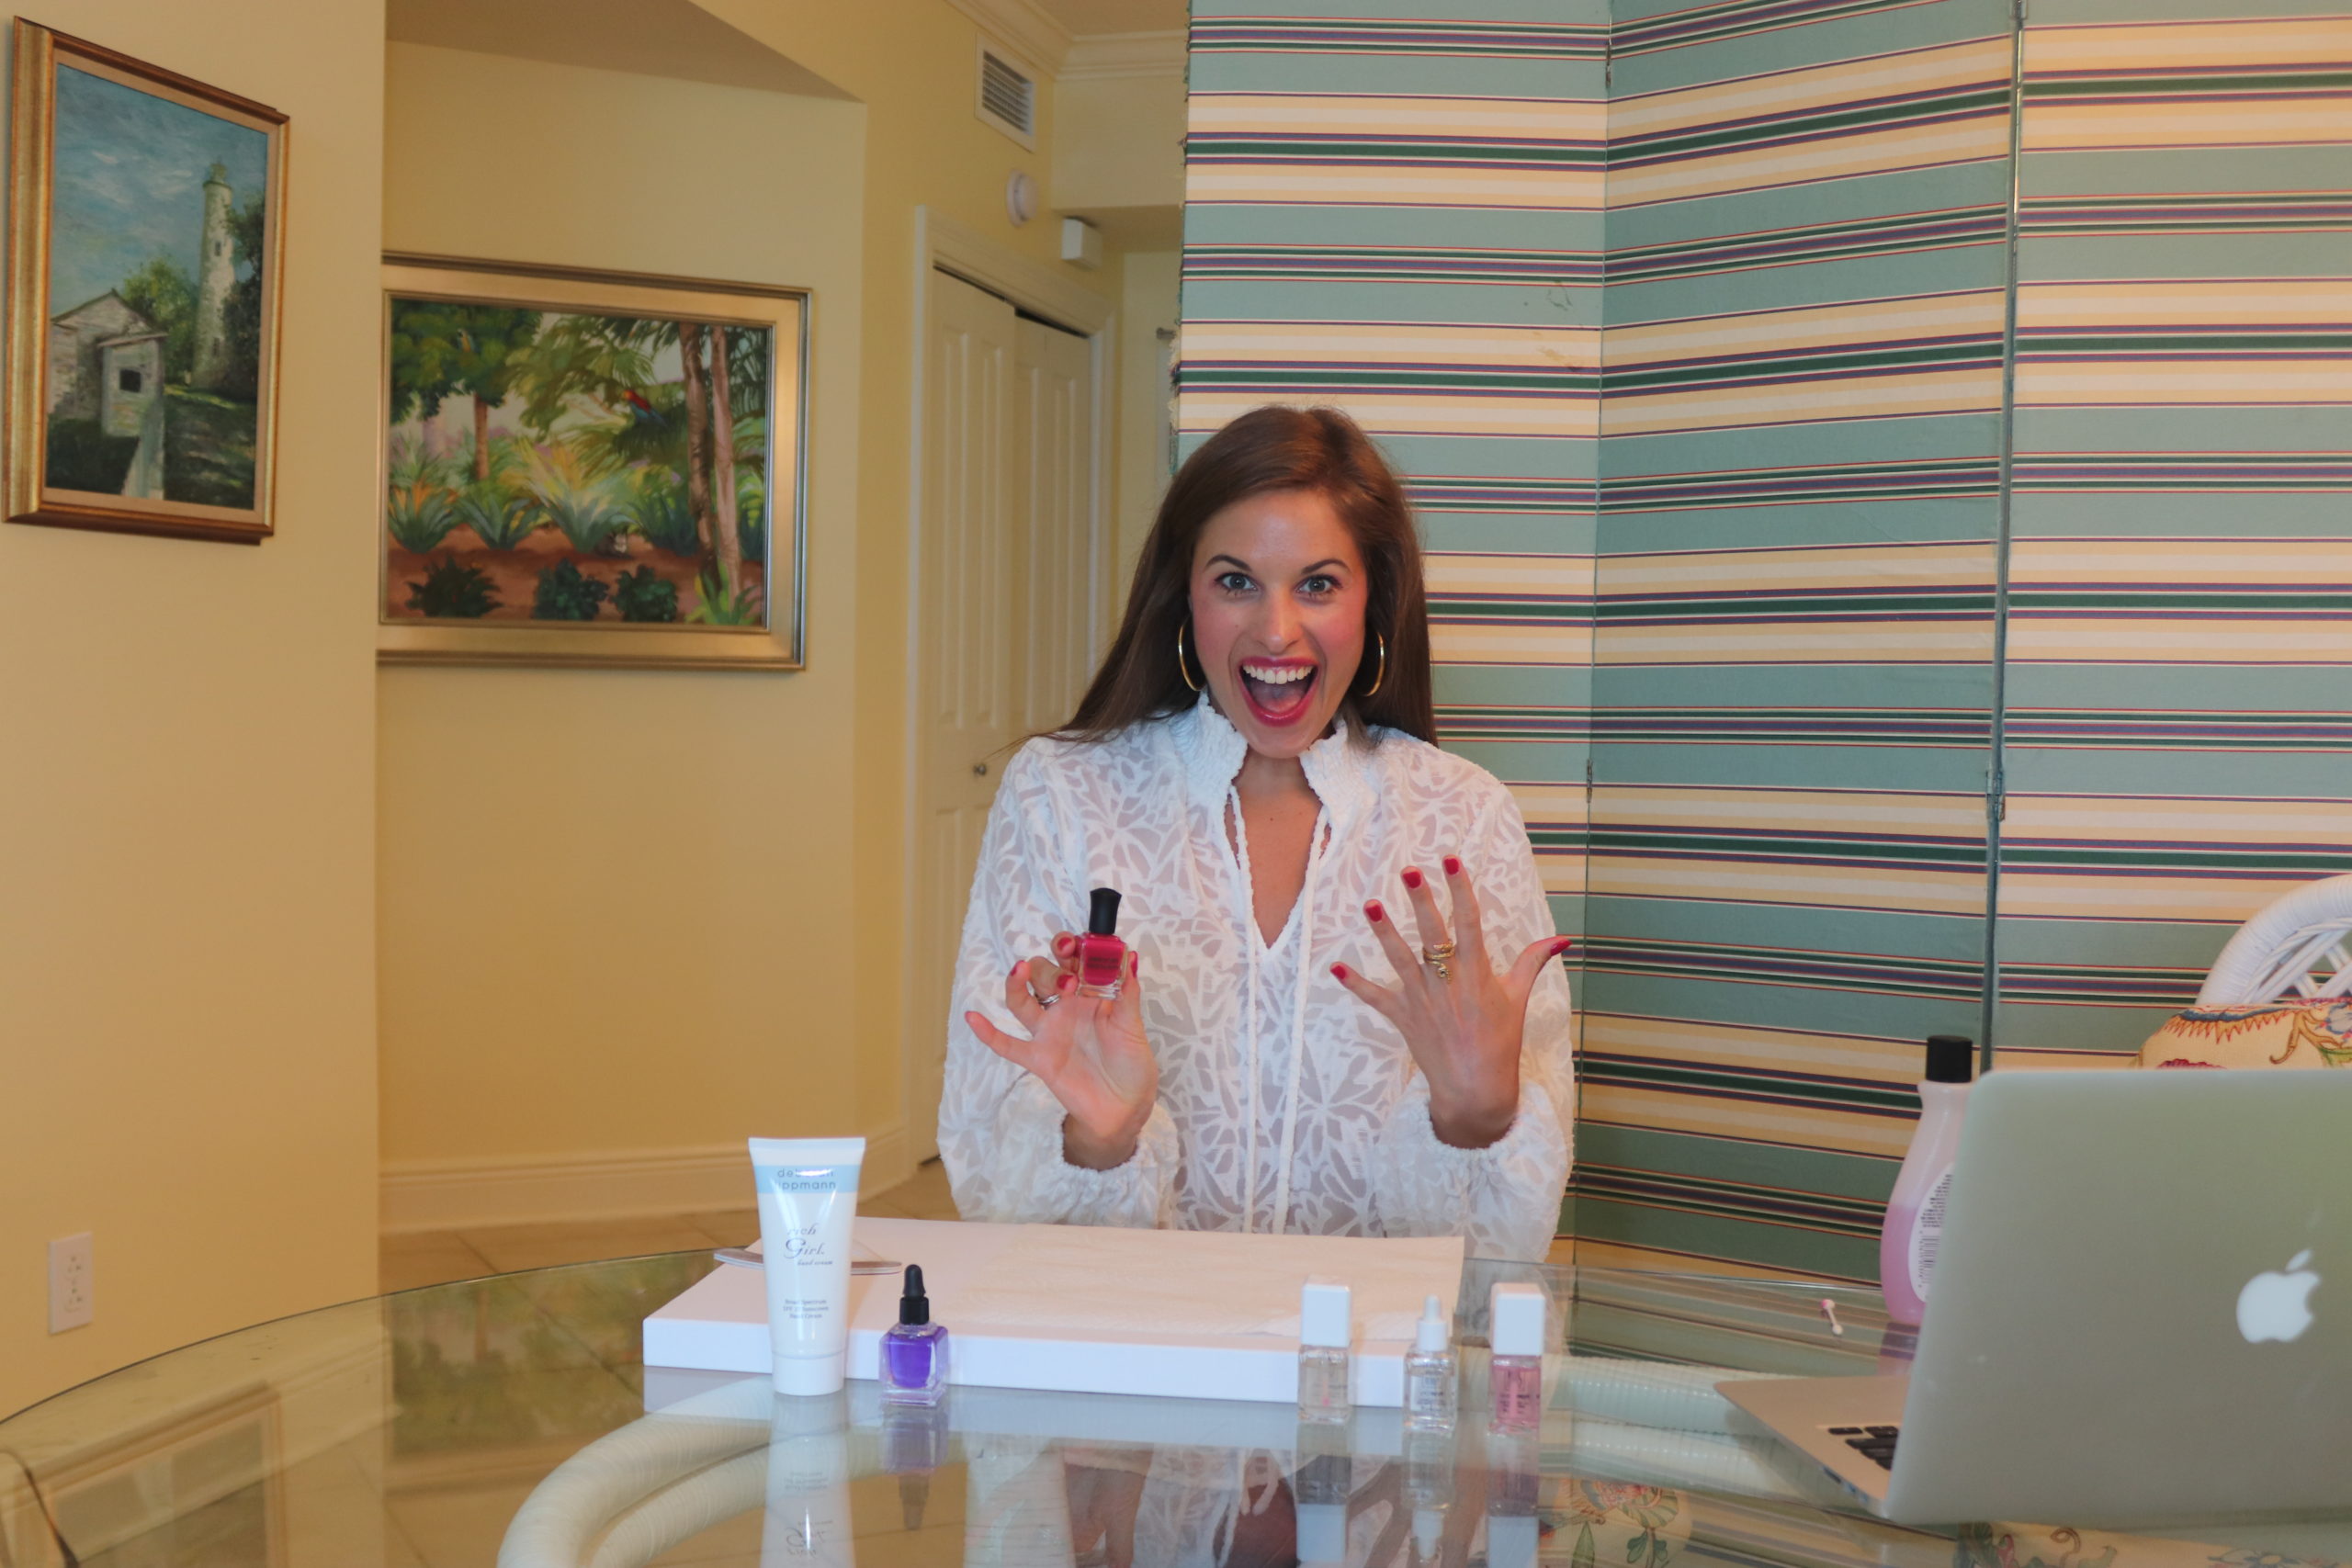 Woman sitting at a table with manicure supplies. She has brown hair and is wearing a white shirt